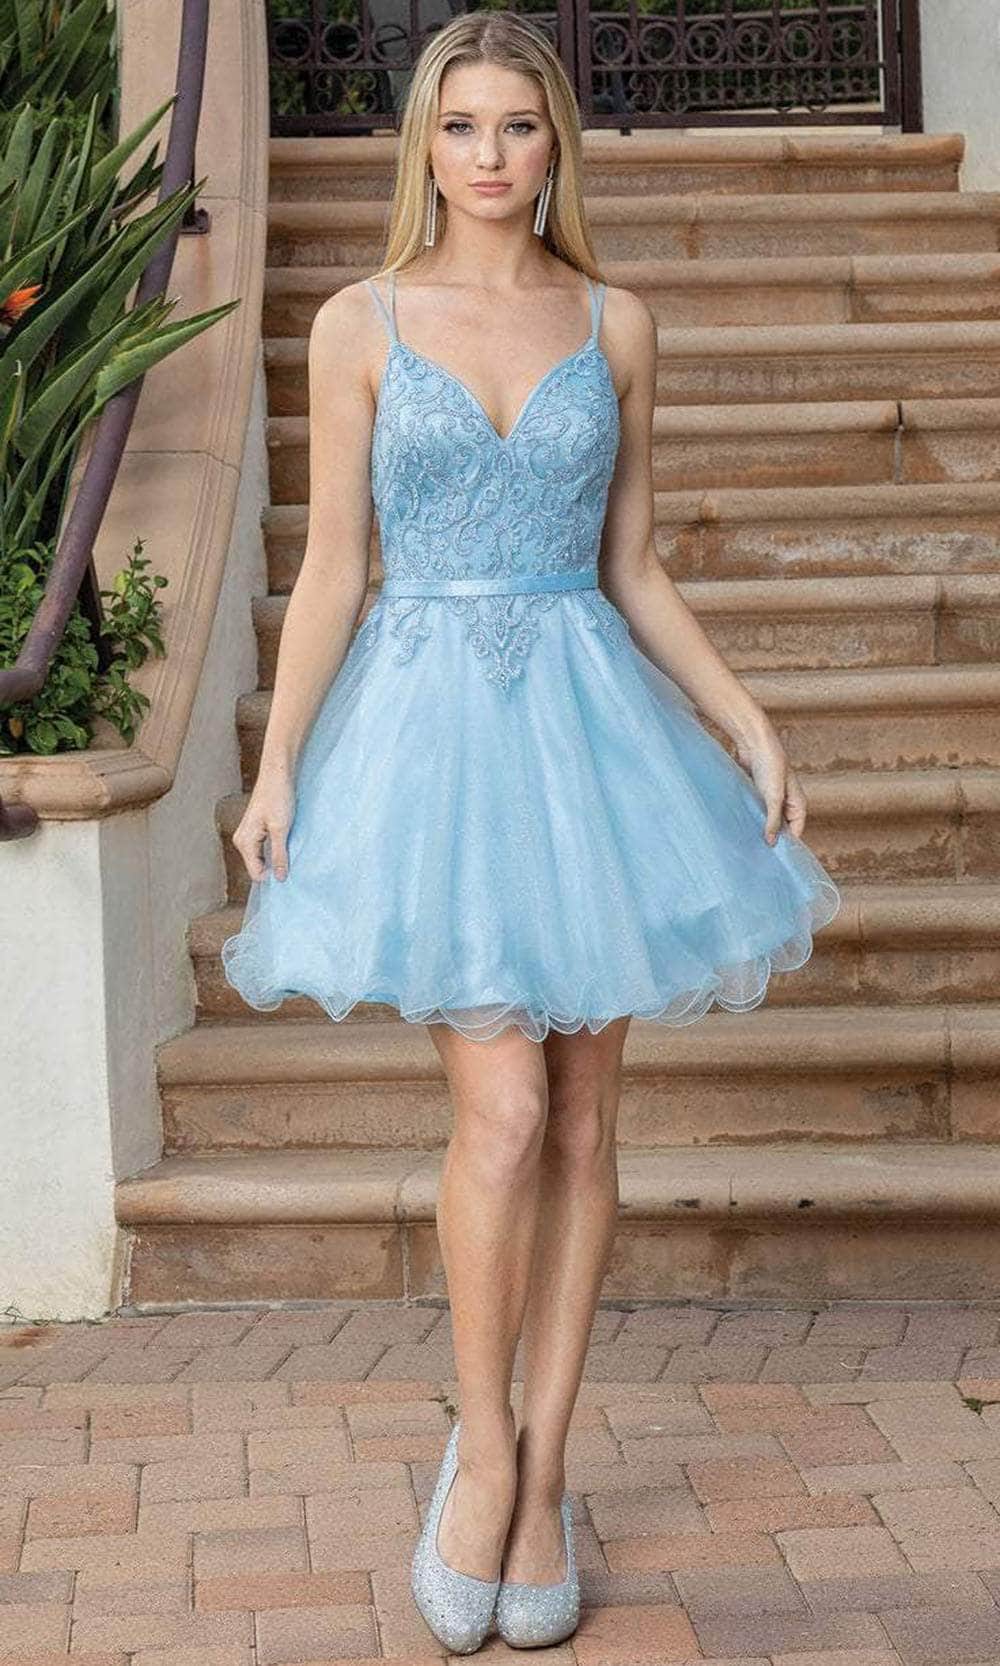 Dancing Queen 3315 - Dual Straps Embellished Cocktail Dress Special Occasion Dress XS / Bahama Blue